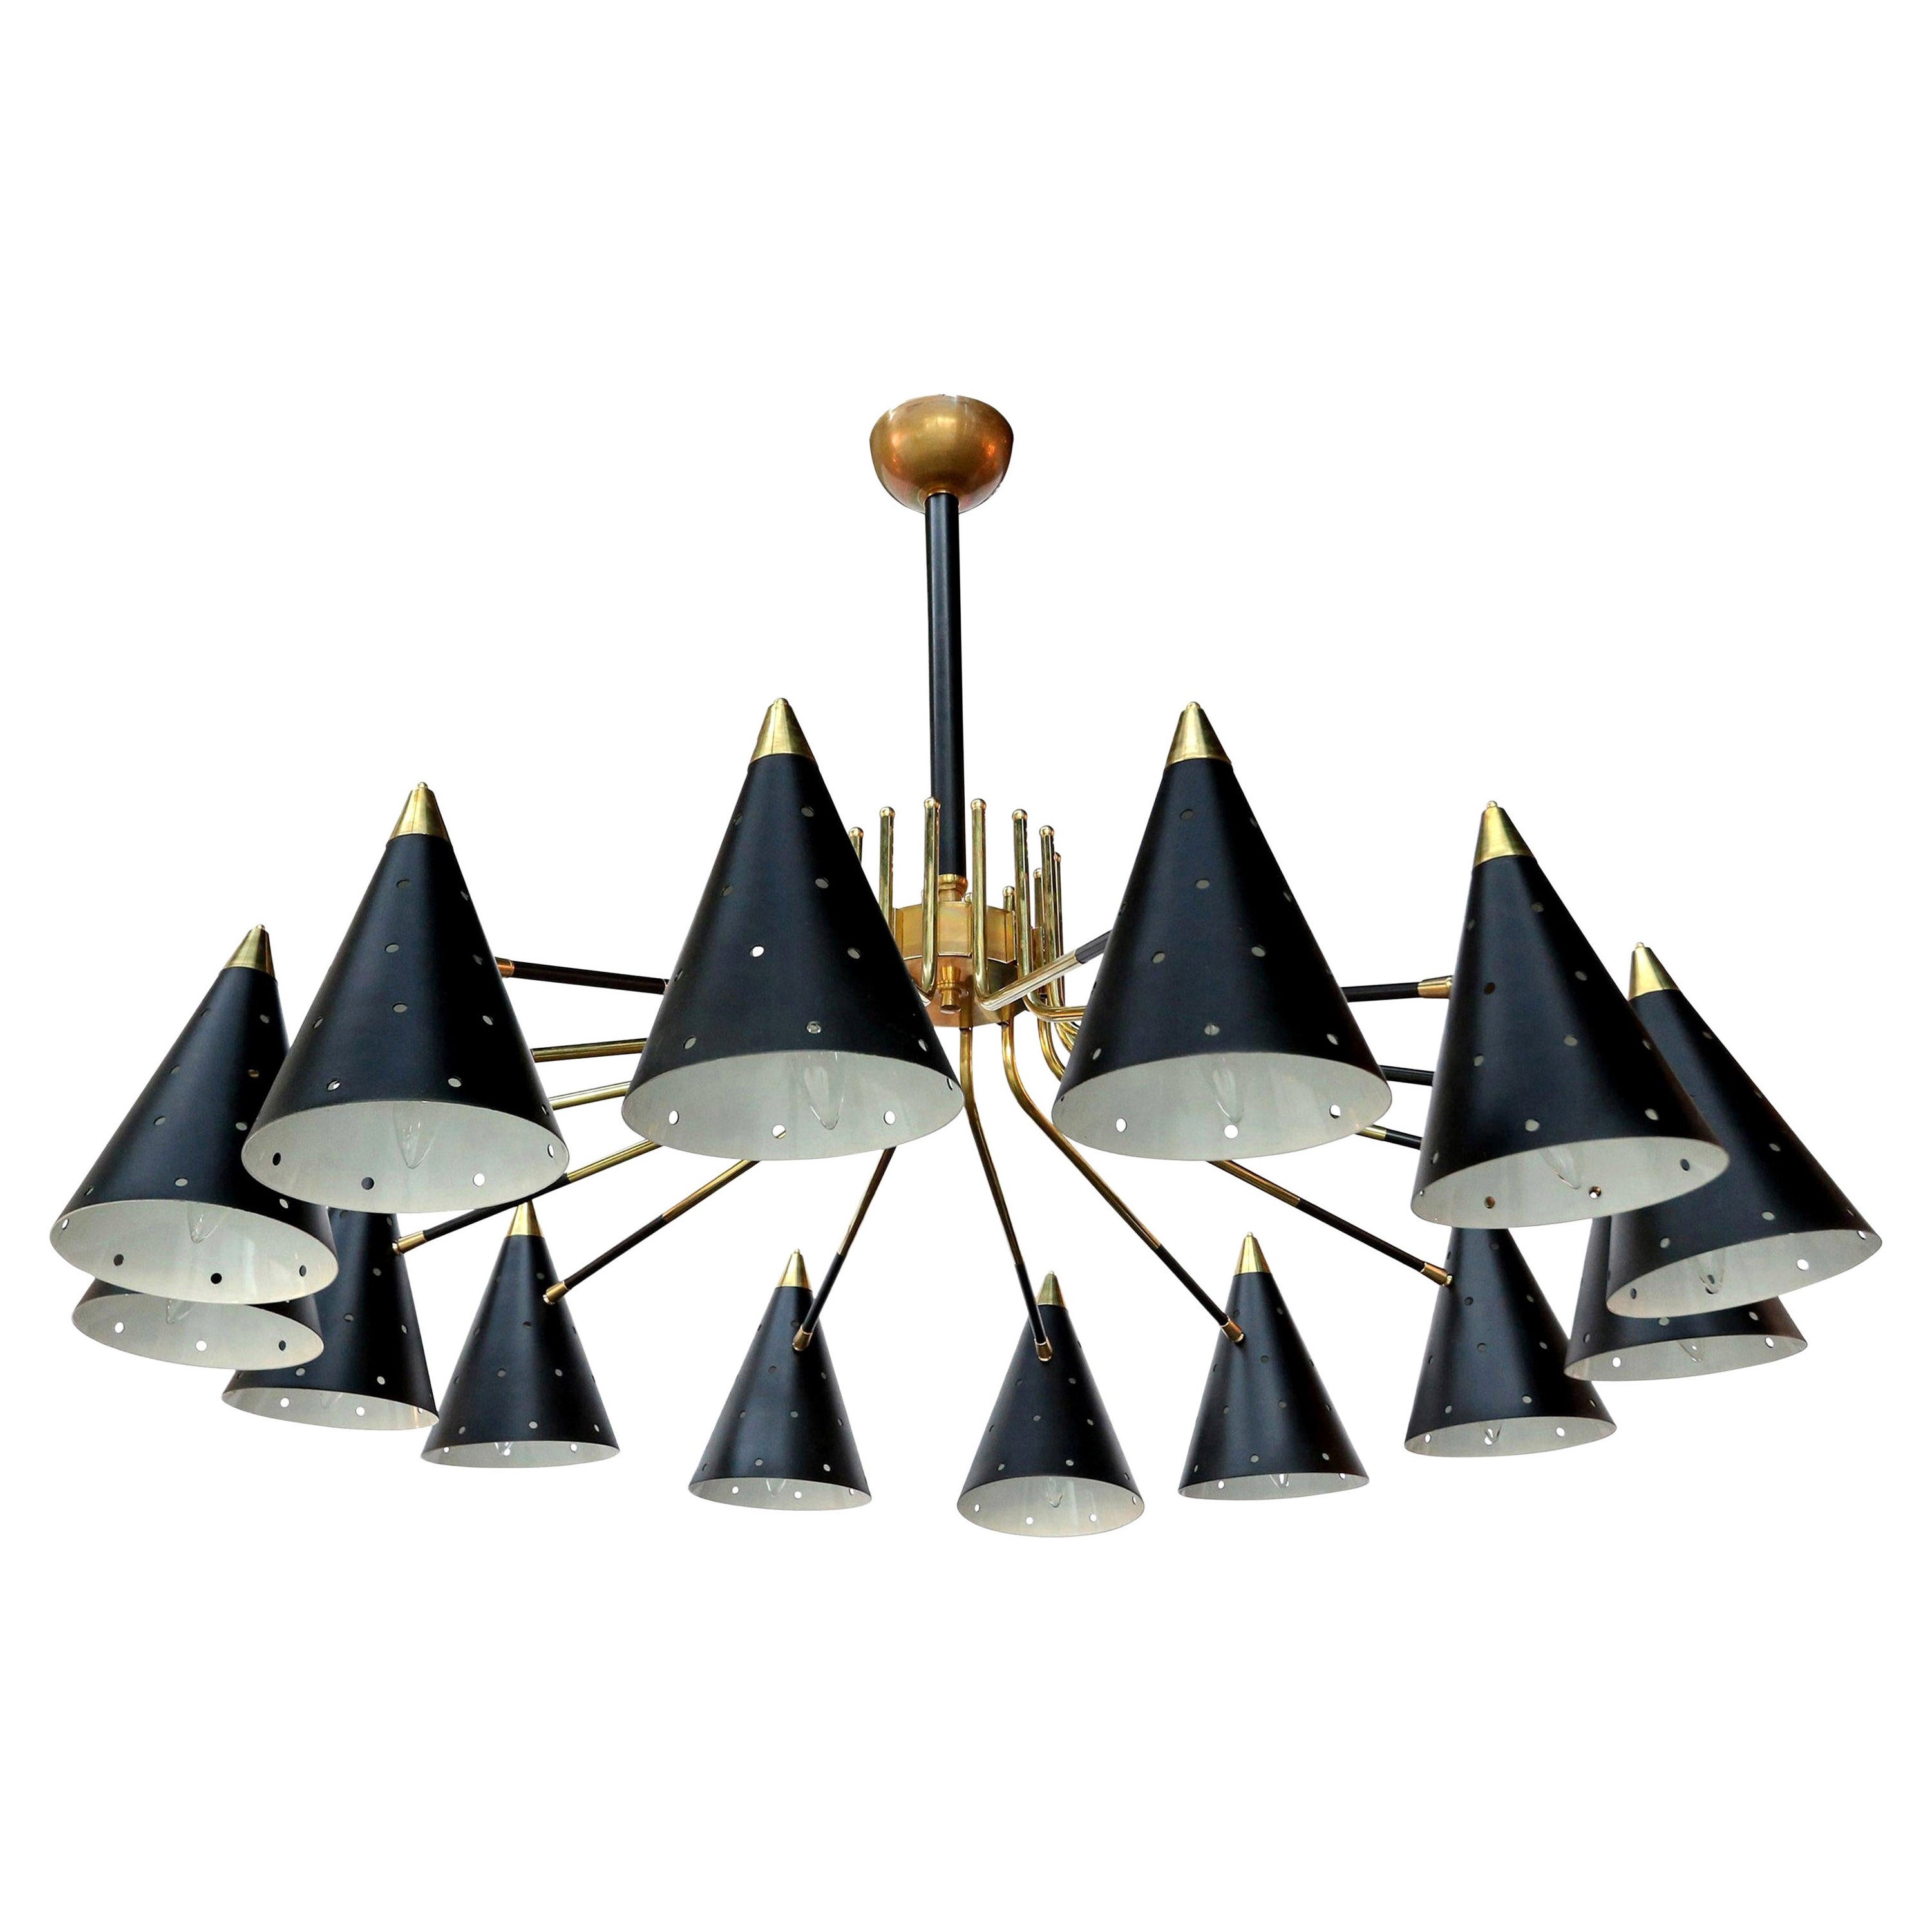 Midcentury Style Brass Chandelier with Black Perforated Shades For Sale